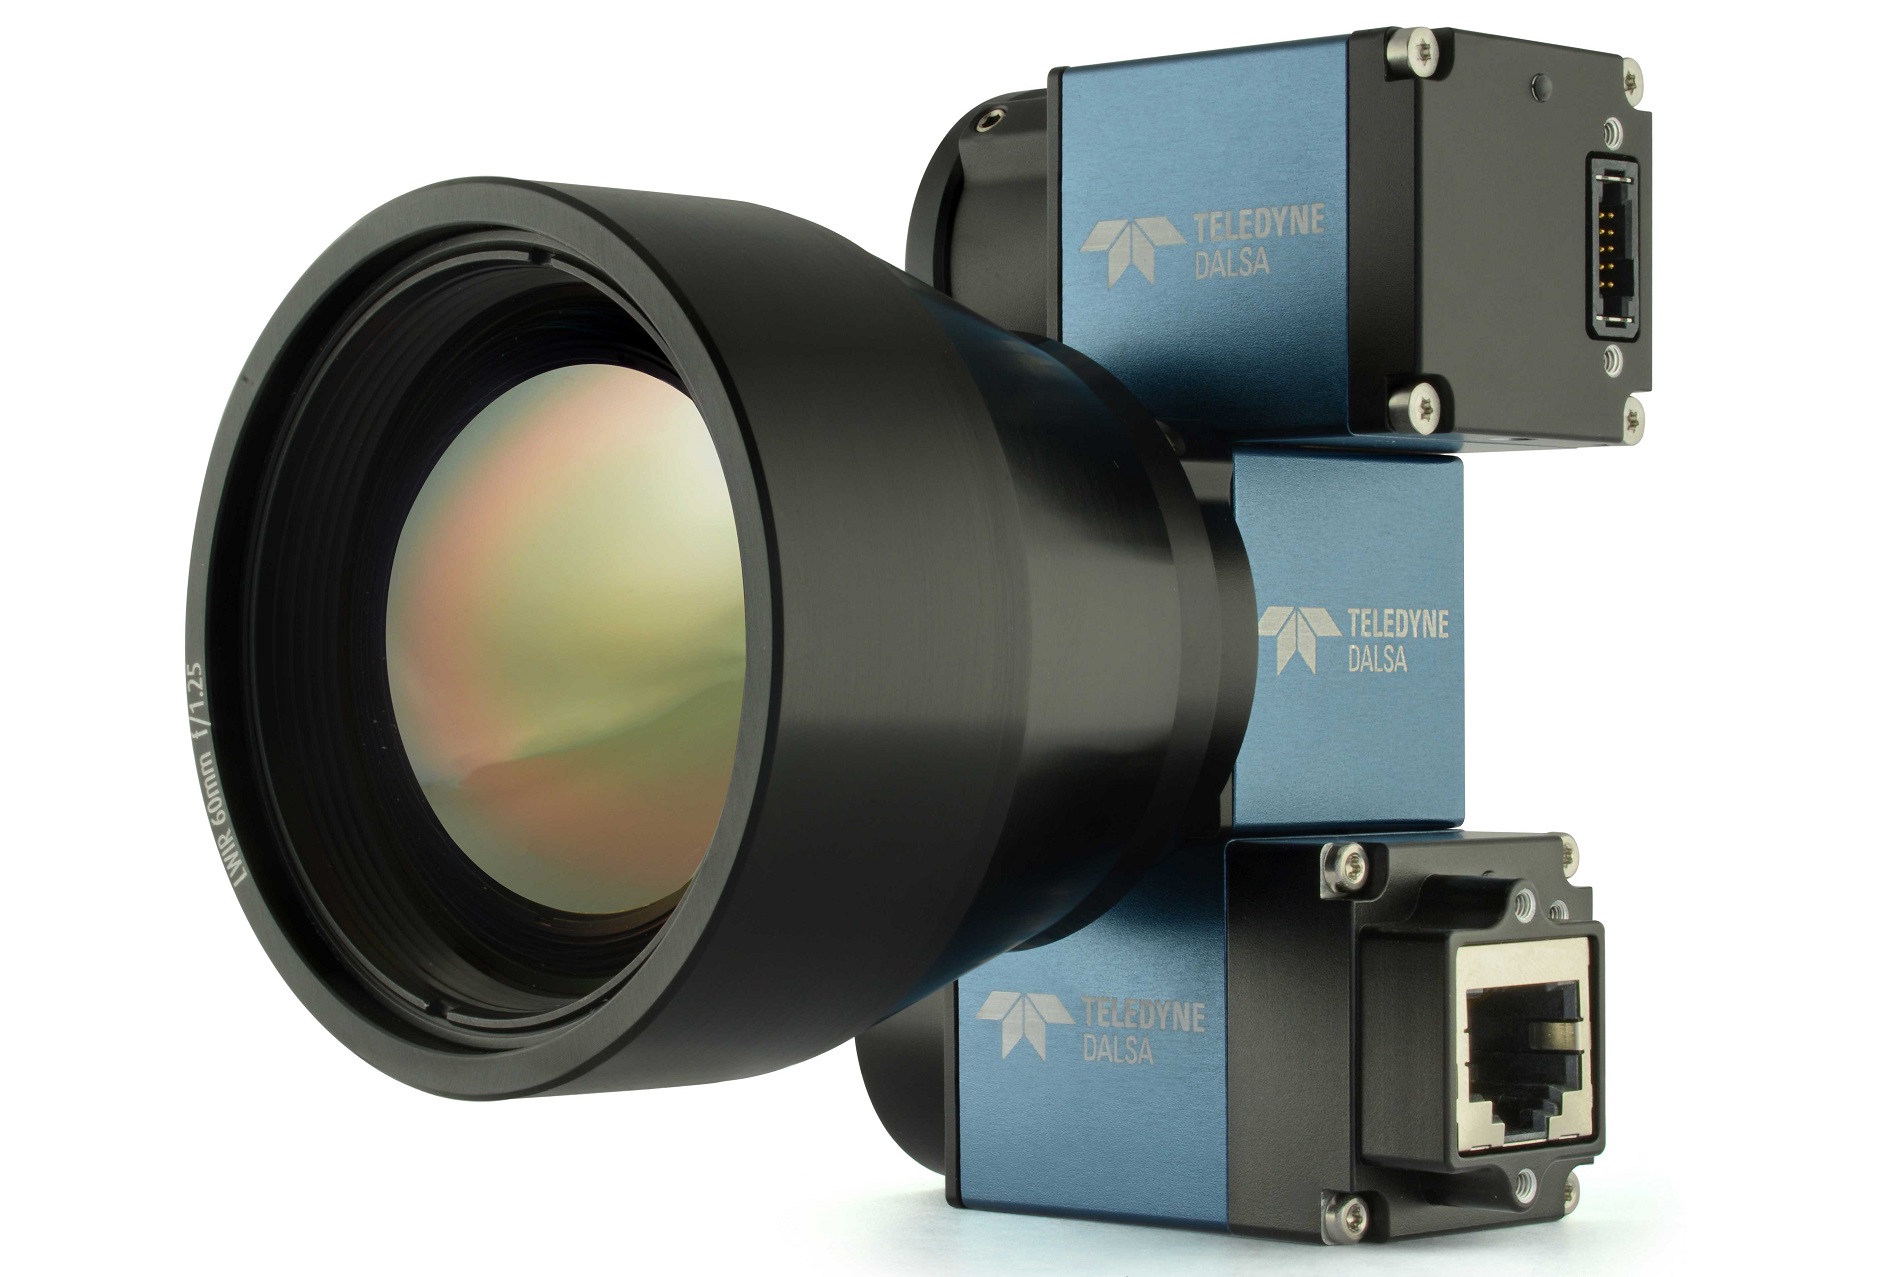 Teledyne DALSA will preview its CalibirTM DX series